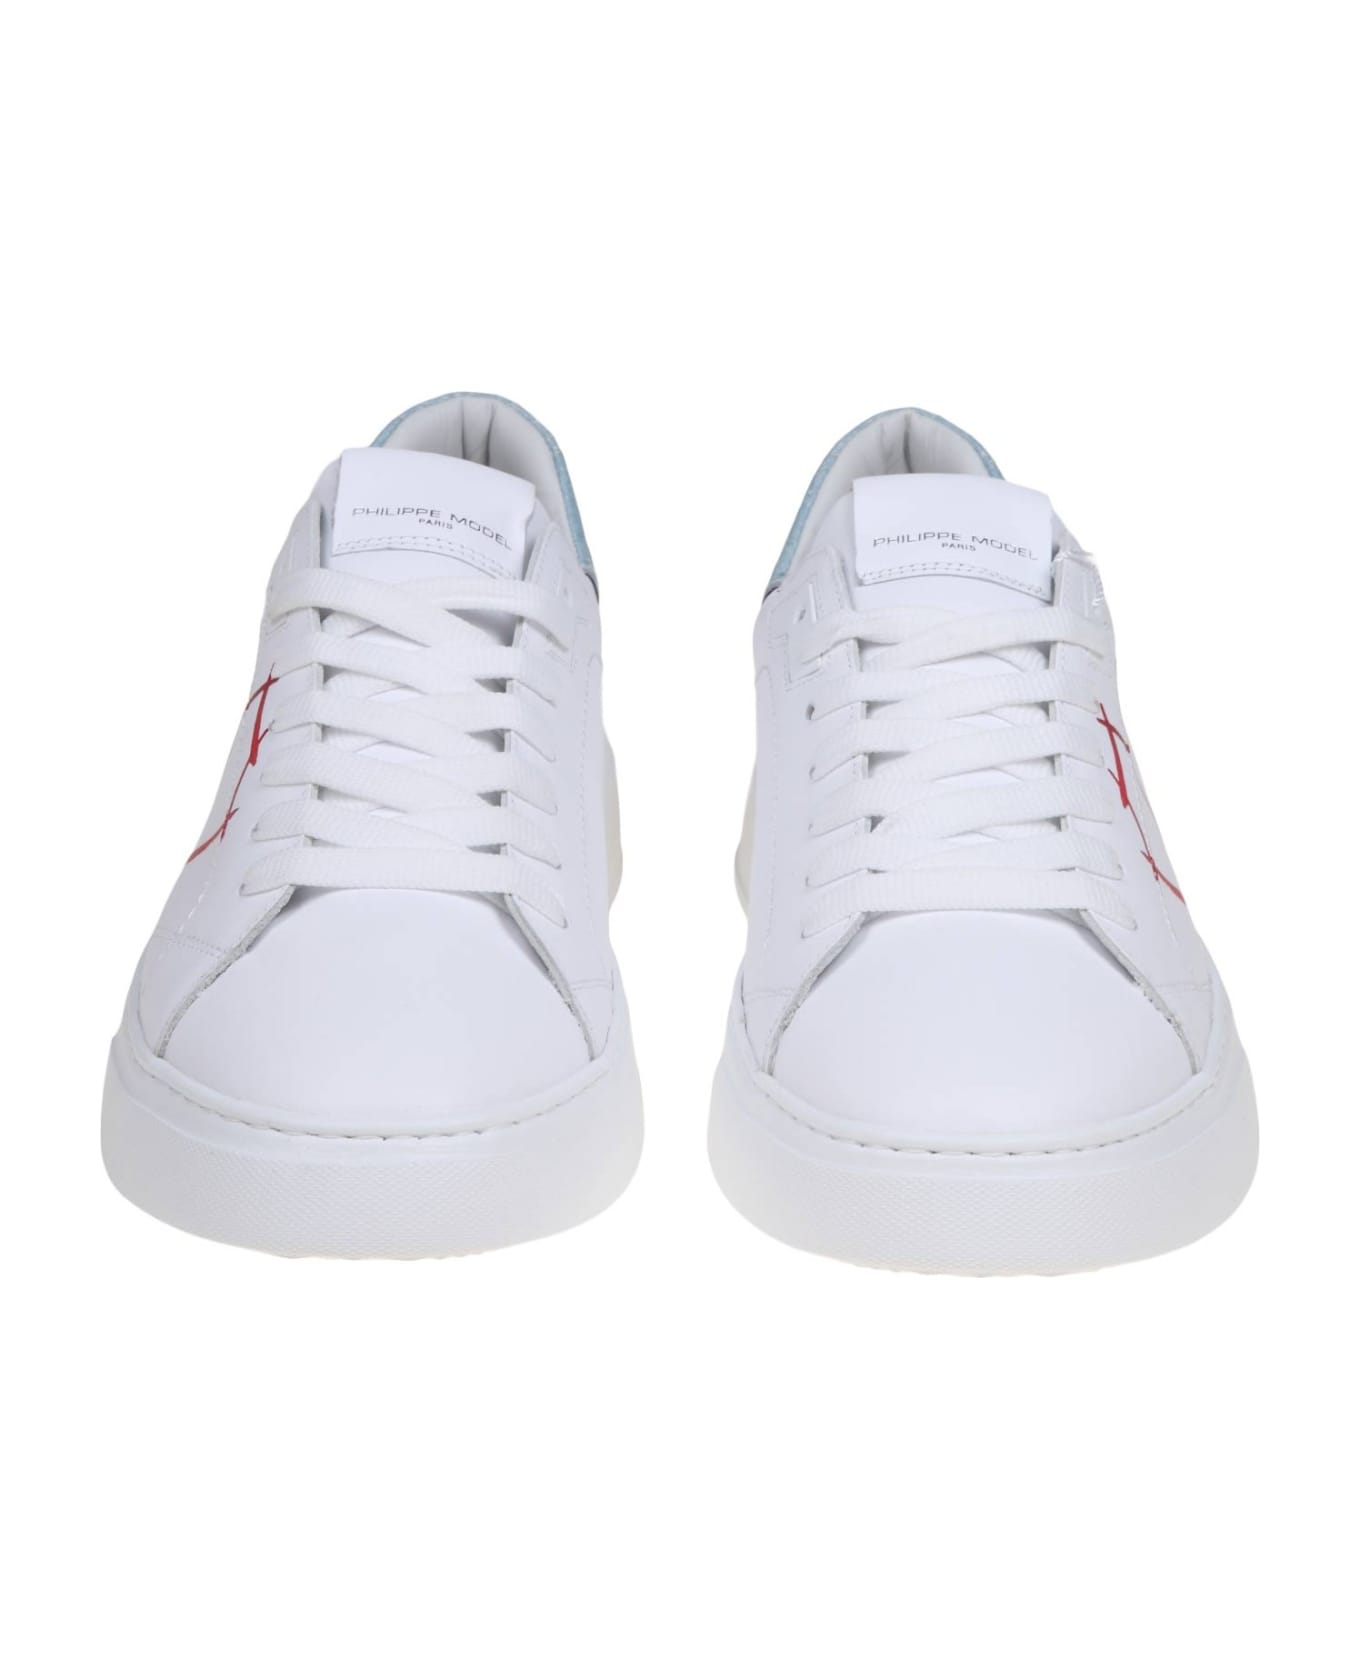 Philippe Model Temple Low Sneakers In White And Light Blue Leather - White/Red スニーカー